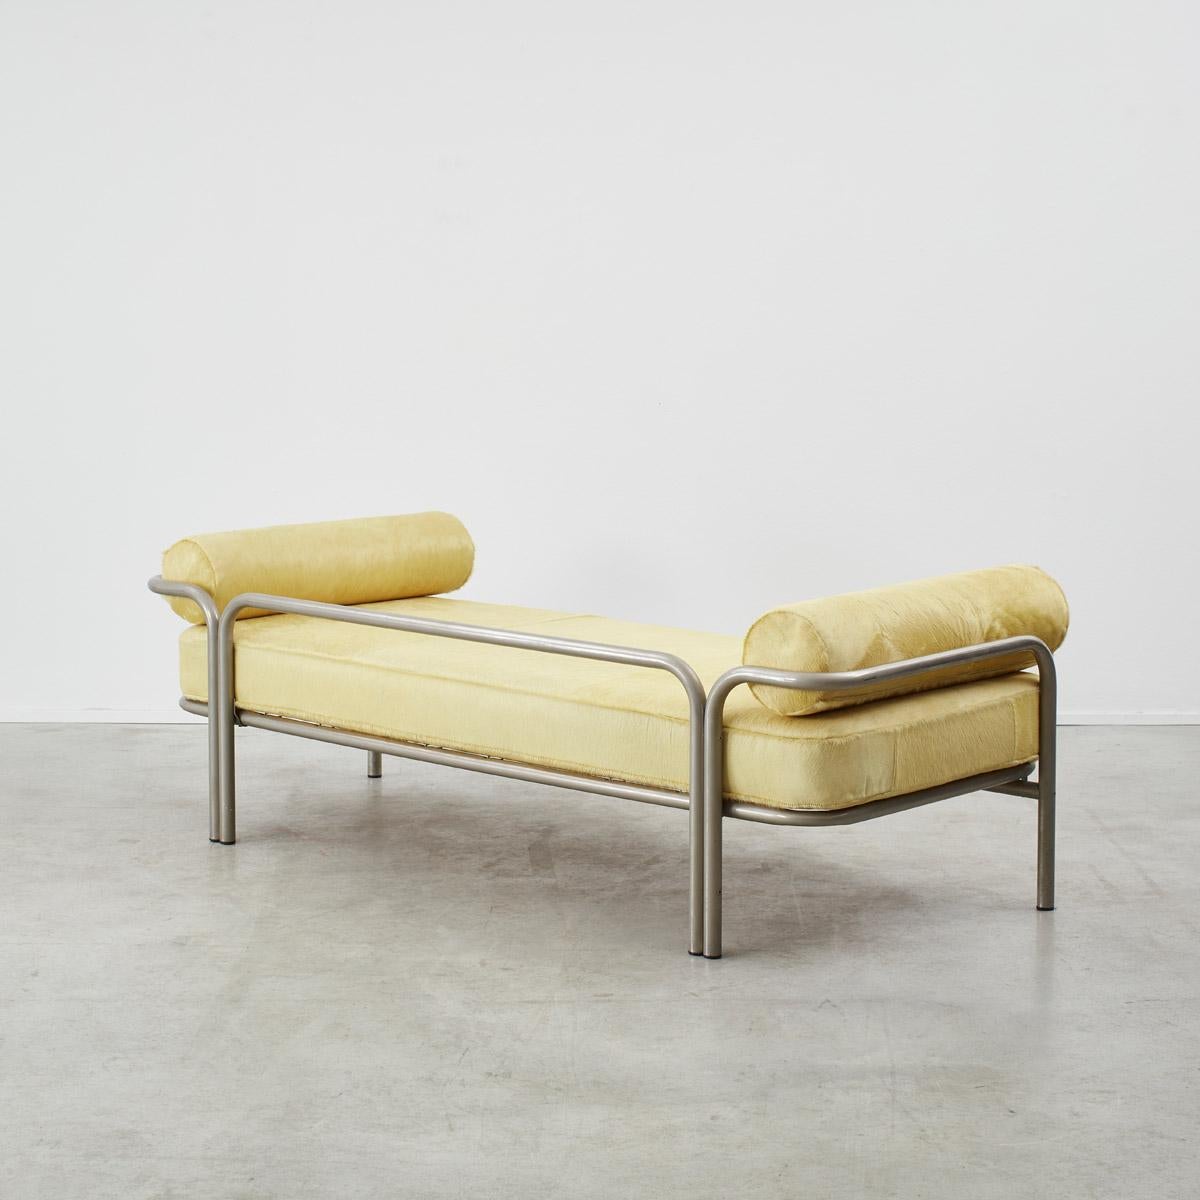 Gae Aulenti Locus Solus daybed for Poltronova, Italy 1964 For Sale 1